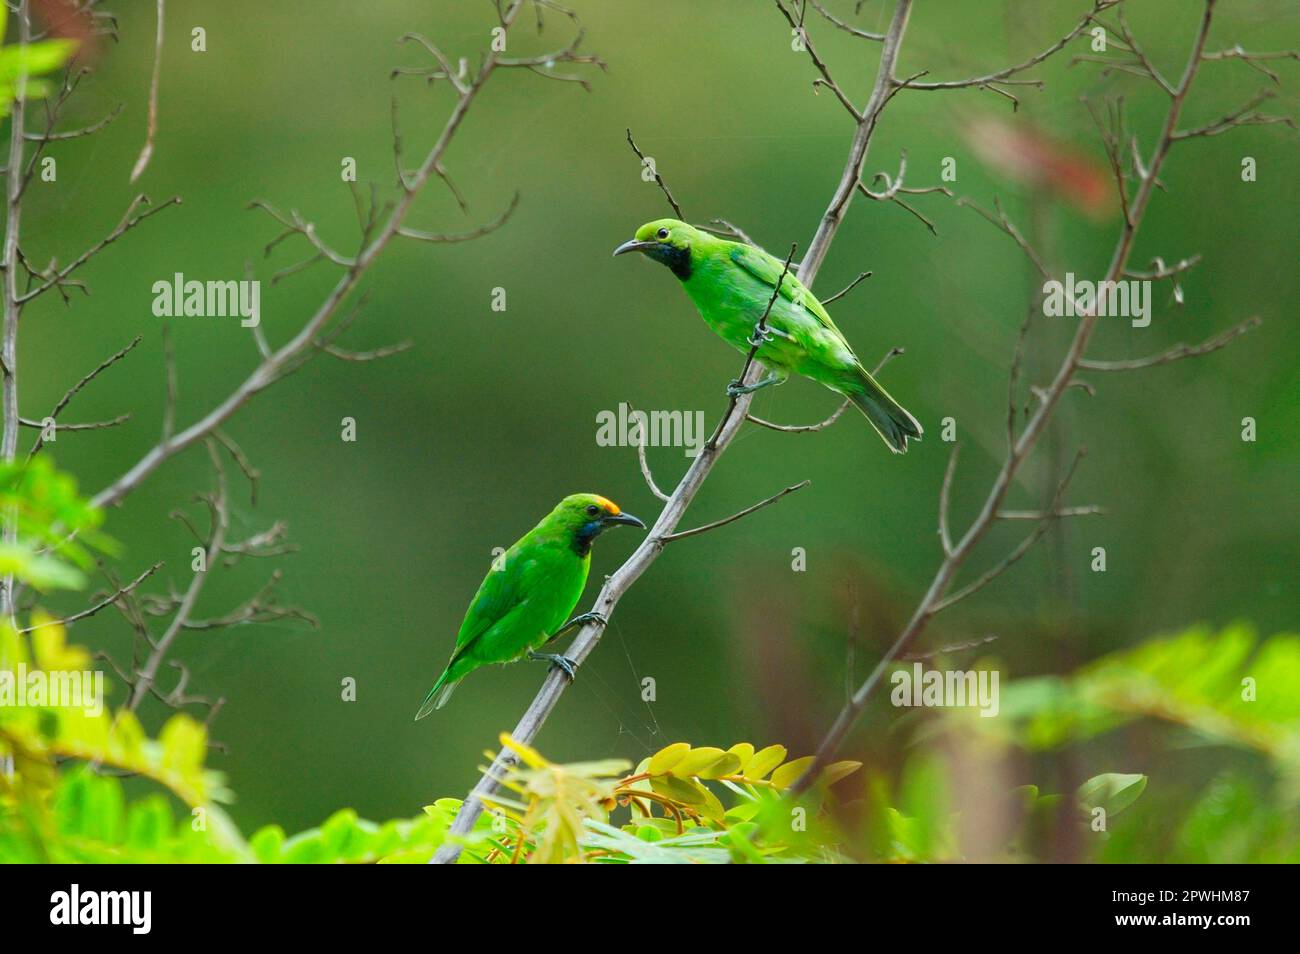 Golden-fronted Leafbird (Chloropsis aurifrons), golden-fronted leafbird, Songbirds, Animals, Birds, Golden-fronted Leafbird adult pair, perched on Stock Photo